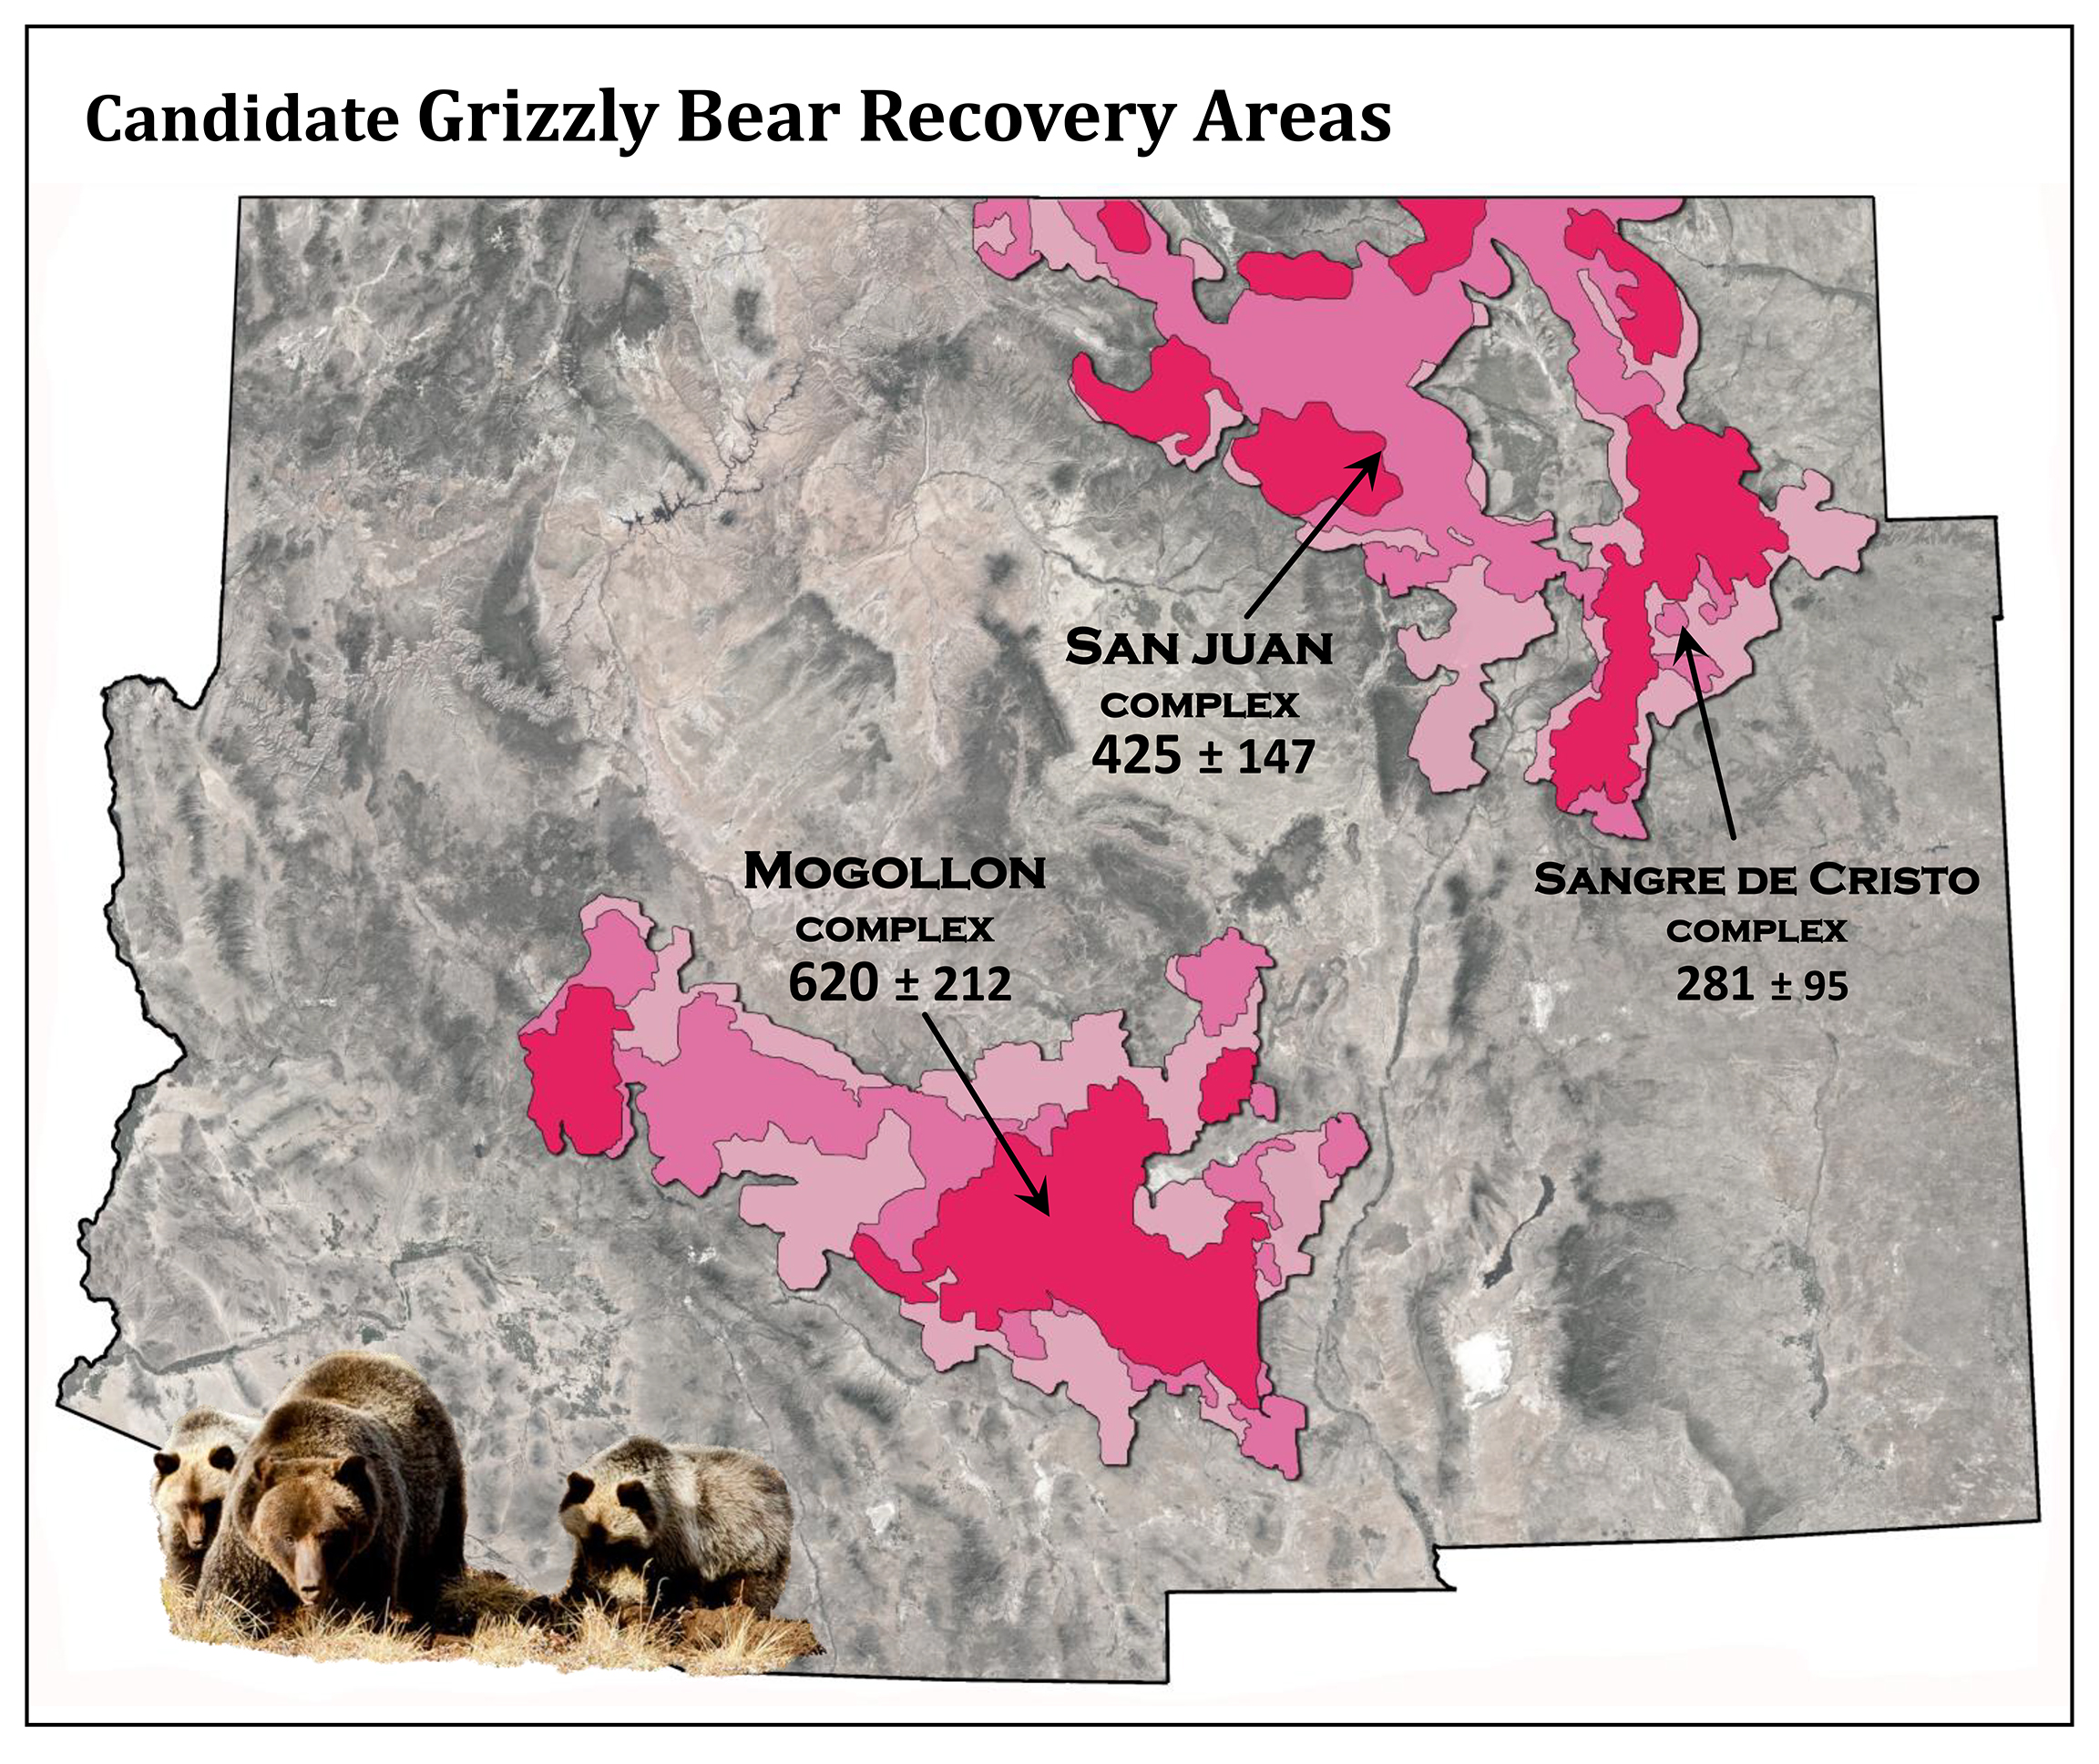 Figure 30 from Grizzly Bear for the Southwest: History & Prospects for Grizzly Bears in Arizona, New Mexico and Colorado Report, showing potential grizzly bear recovery areas in the Southwest